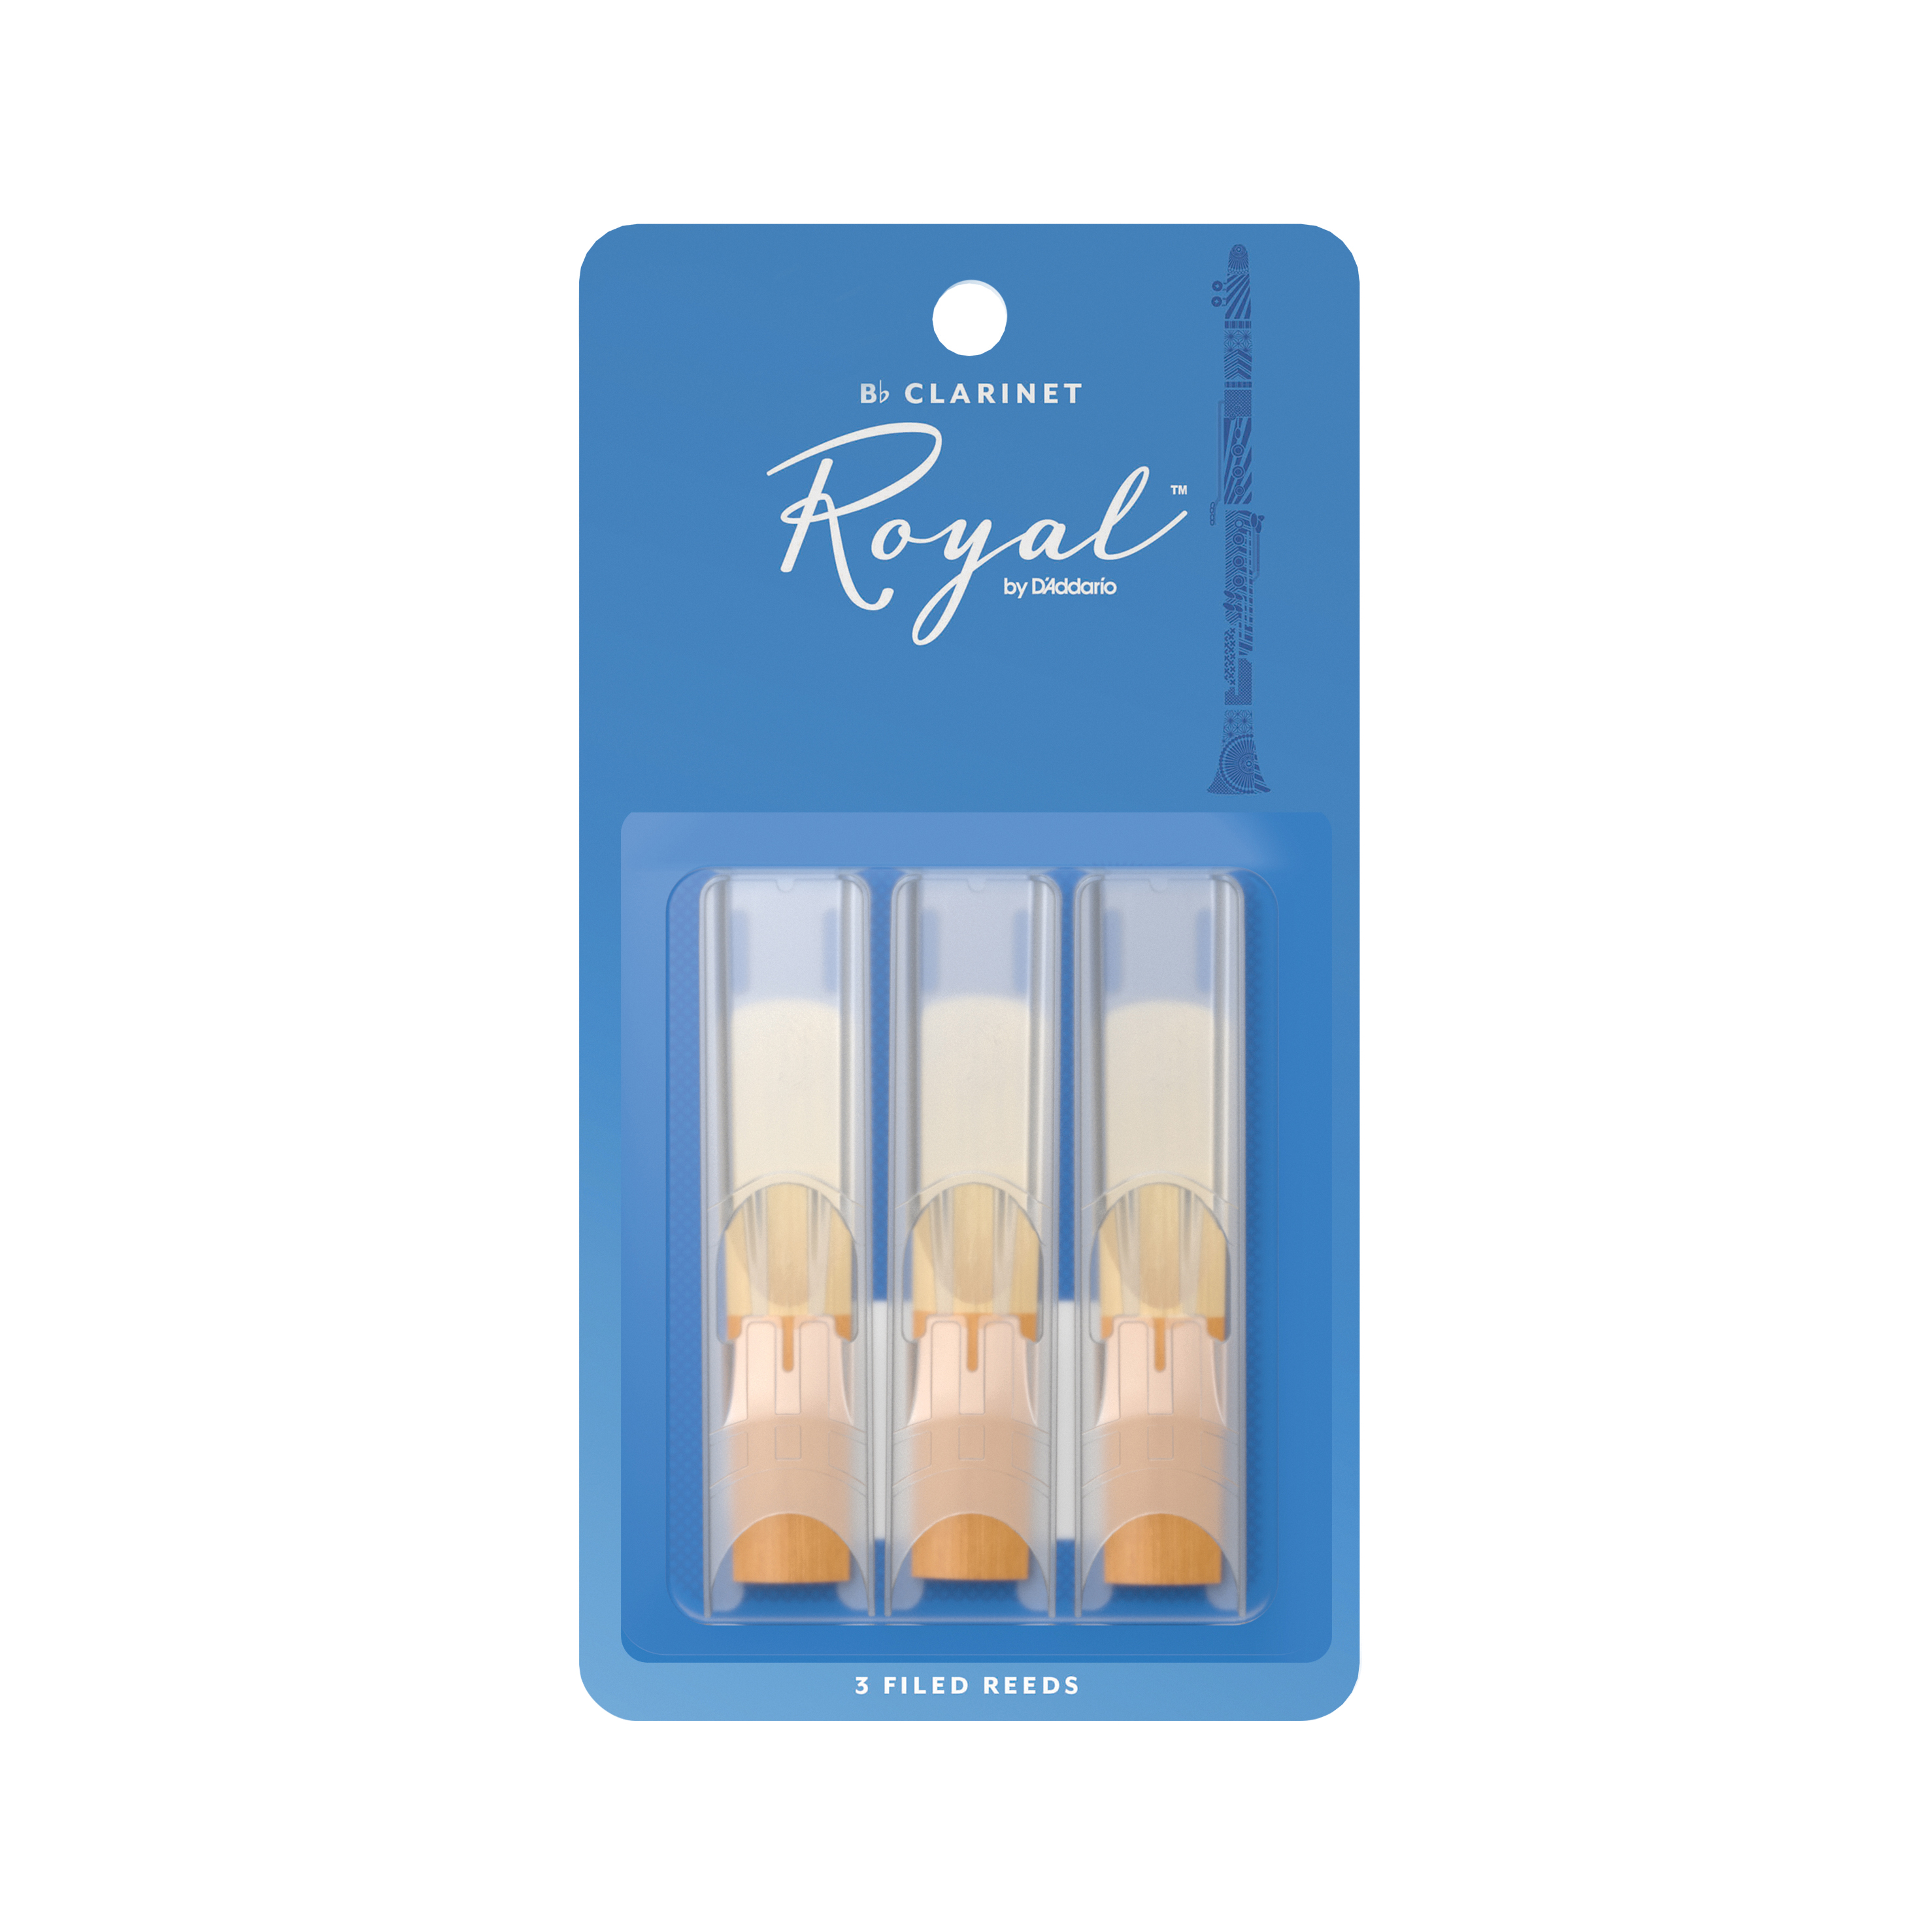 Blue Three pack of Roal by D'addario B Flat Clarinet reeds